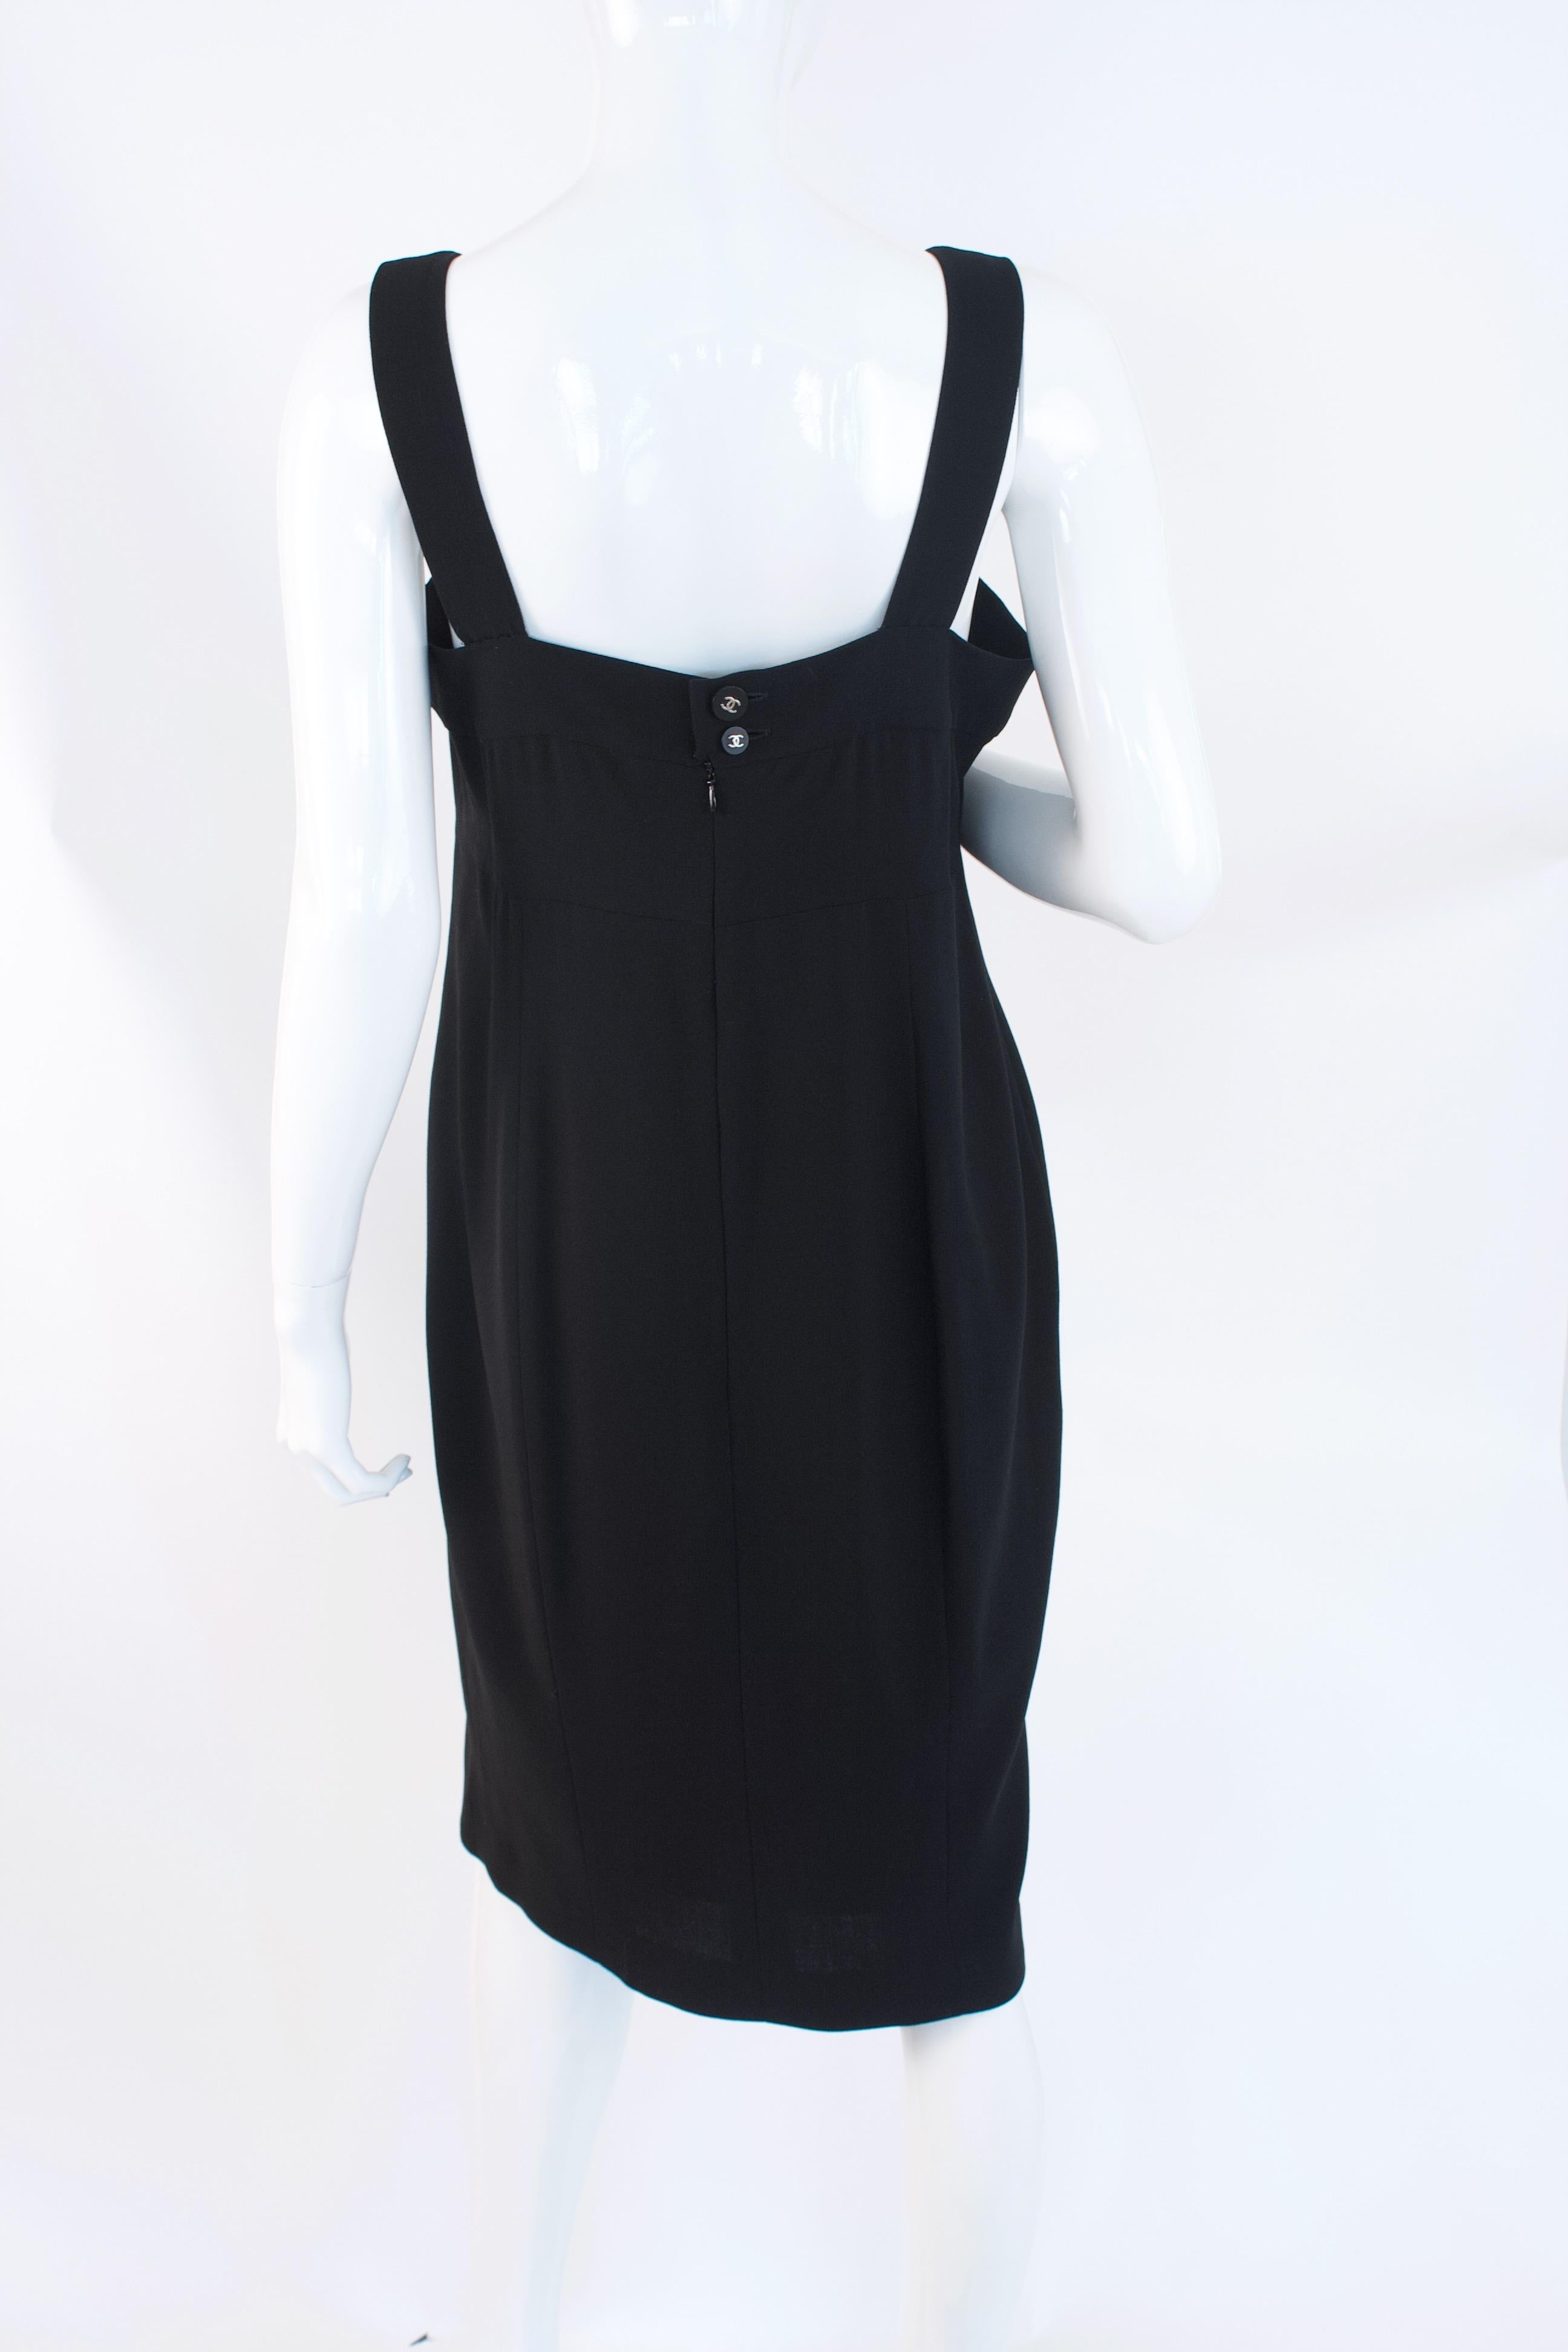 CHANEL Vintage Spring 1998 Little Black Dress In Excellent Condition For Sale In Georgetown, ME